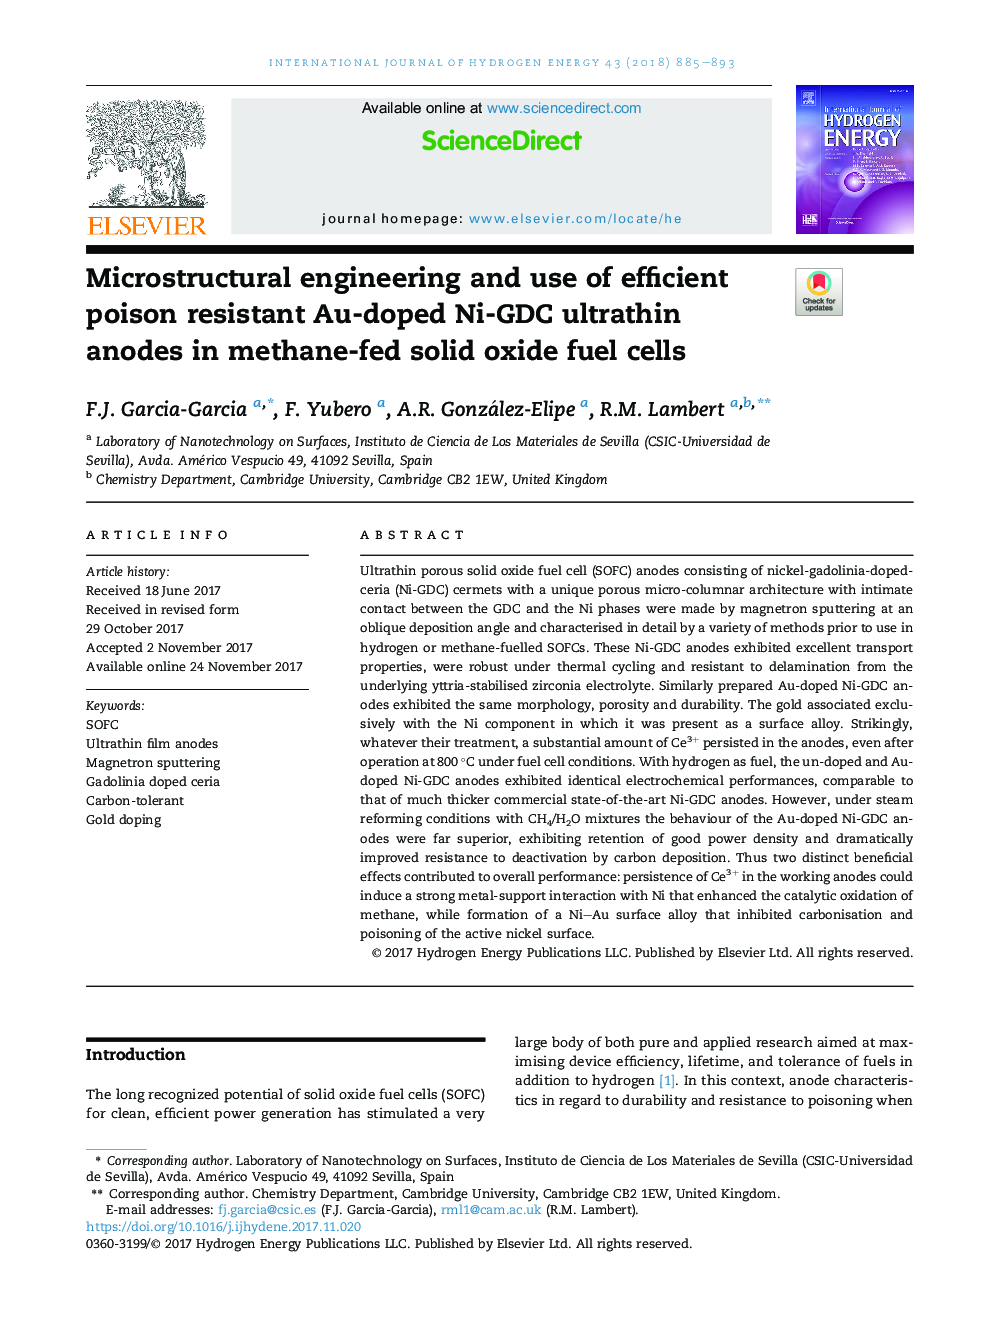 Microstructural engineering and use of efficient poison resistant Au-doped Ni-GDC ultrathin anodes in methane-fed solid oxide fuel cells